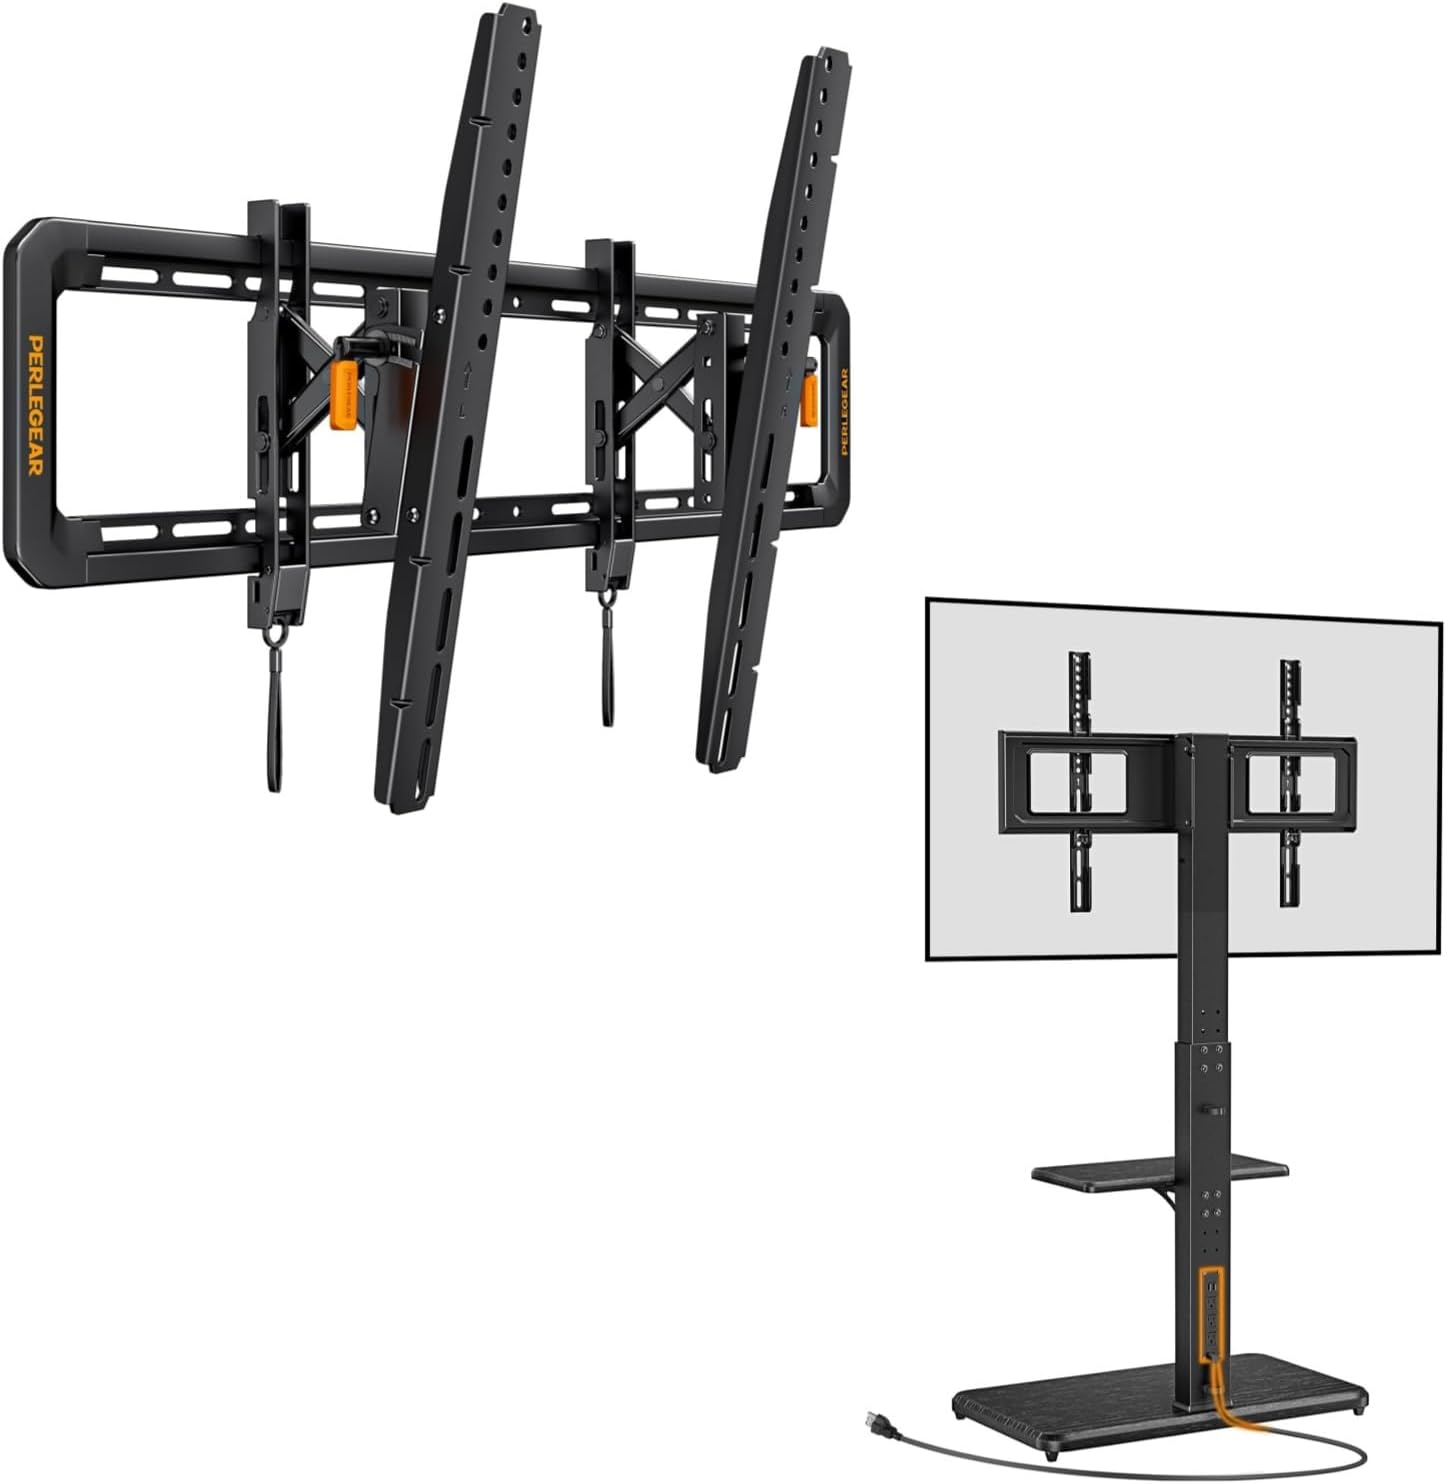 Perlegear Advanced Tilt TV Wall Mount, UL-Listed Wall Mount TV Bracket for Most 42-90 inch TVs up to 150 lbs with Perlegear Floor TV Stand with Power Outlet, Universal TV Stand for 32-70 inch TVs